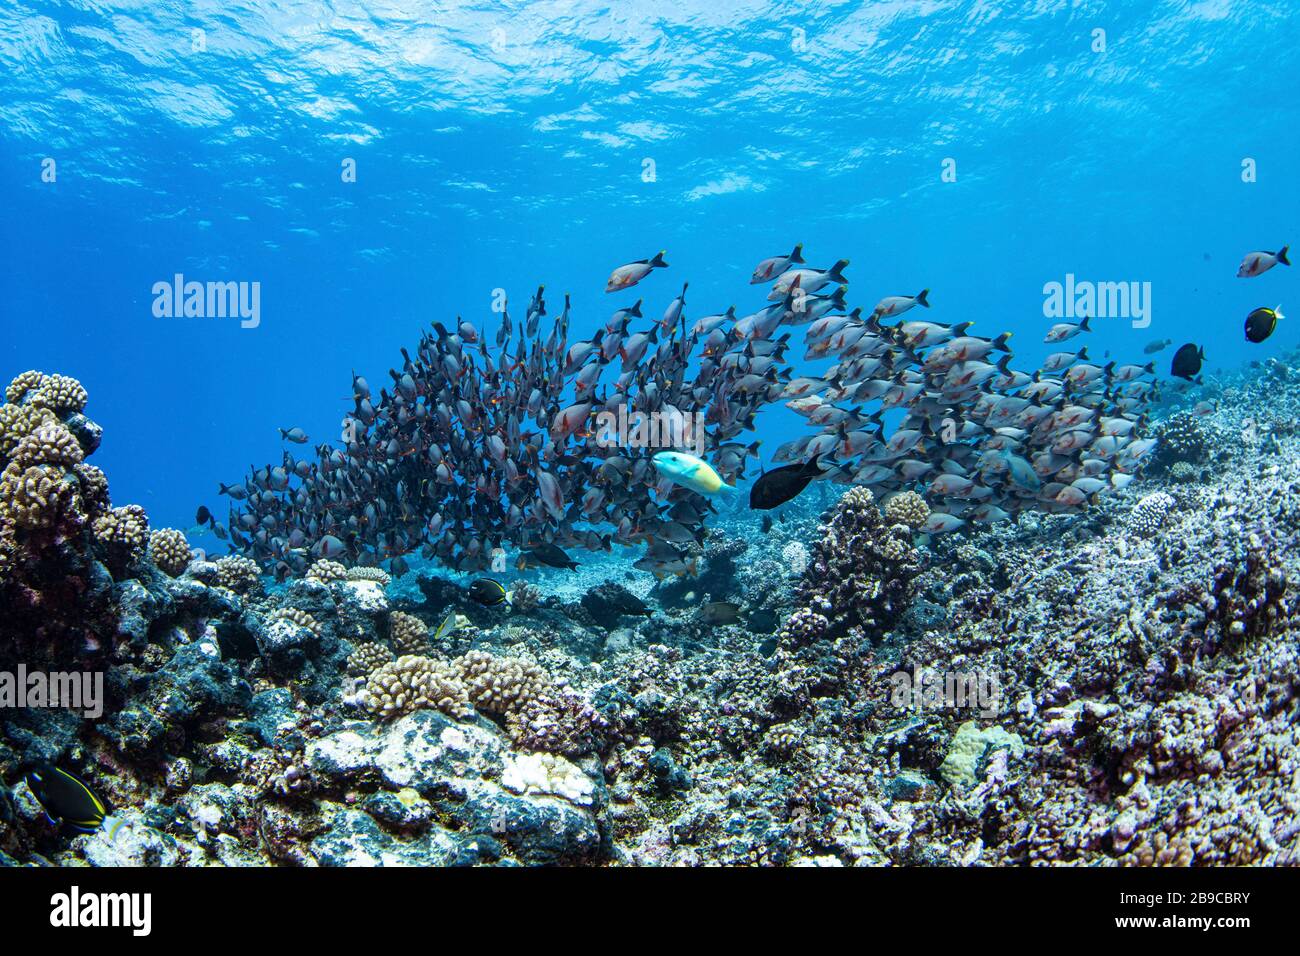 A large school of fish hurries over a reef in Tahiti, French Polynesia. Stock Photo